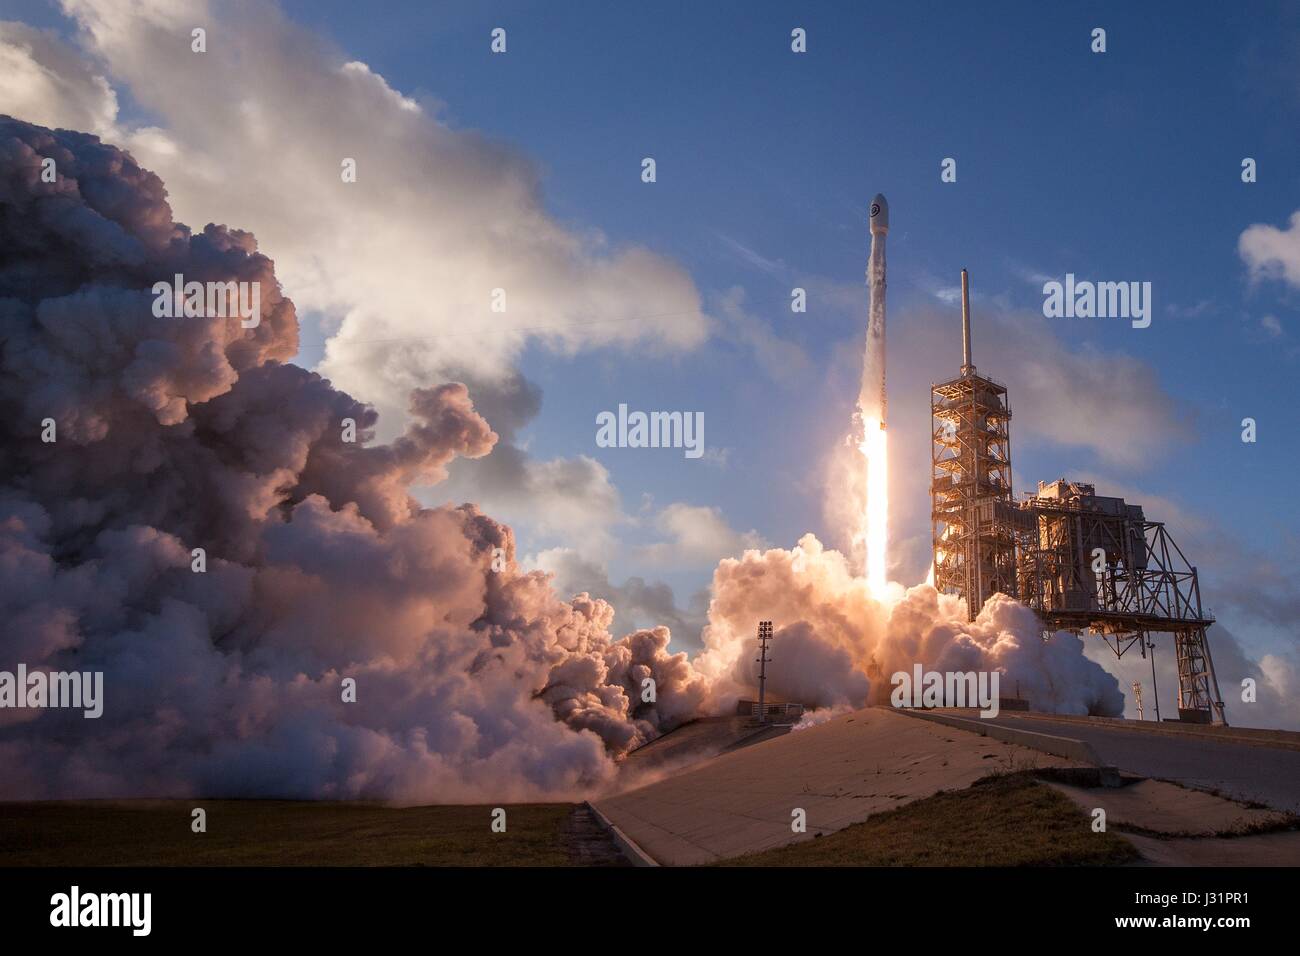 Cape Canaveral, United States Of America. 01st May, 2017. The SpaceX Falcon 9 rocket carrying a classified military satellite successfully blasts off from Launch Complex 39A at the Kennedy Space Center May 1, 2017 in Cape Canaveral, Florida. The the delayed SpaceX mission was the first for the National Reconnaissance Office carrying a top-secret spy satellite. Stock Photo